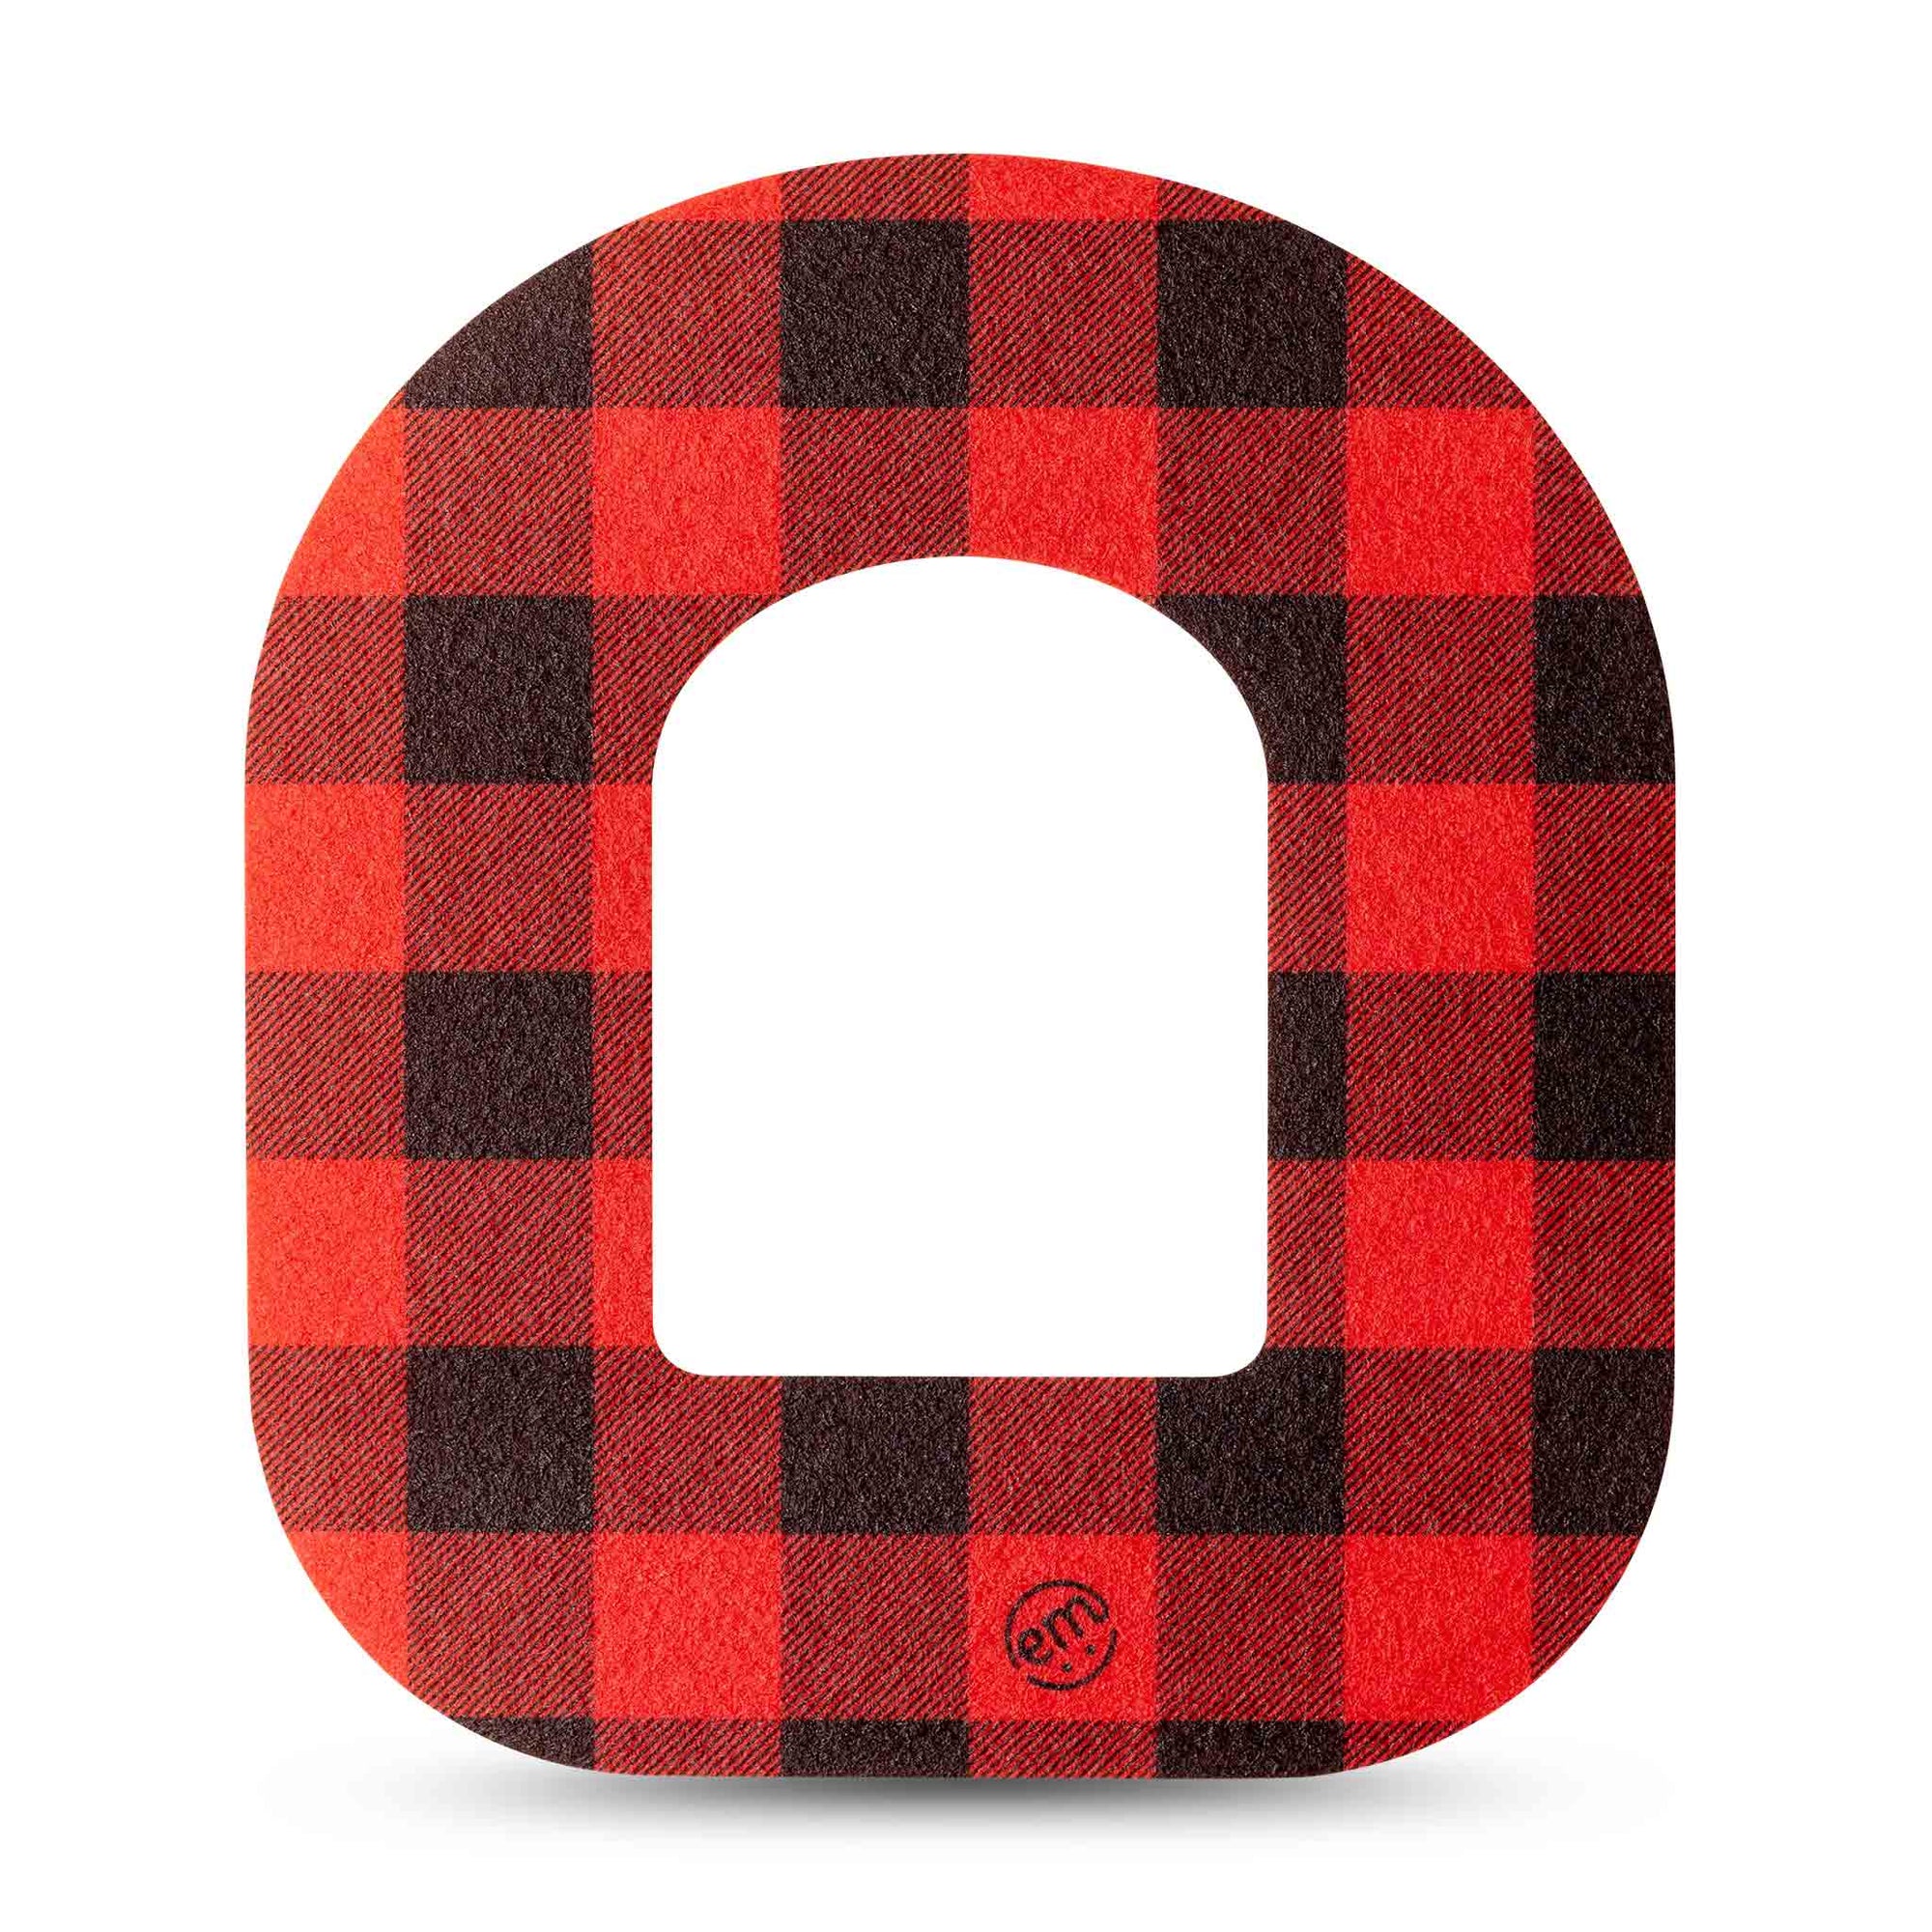 ExpressionMed Lumberjack Pod Patch